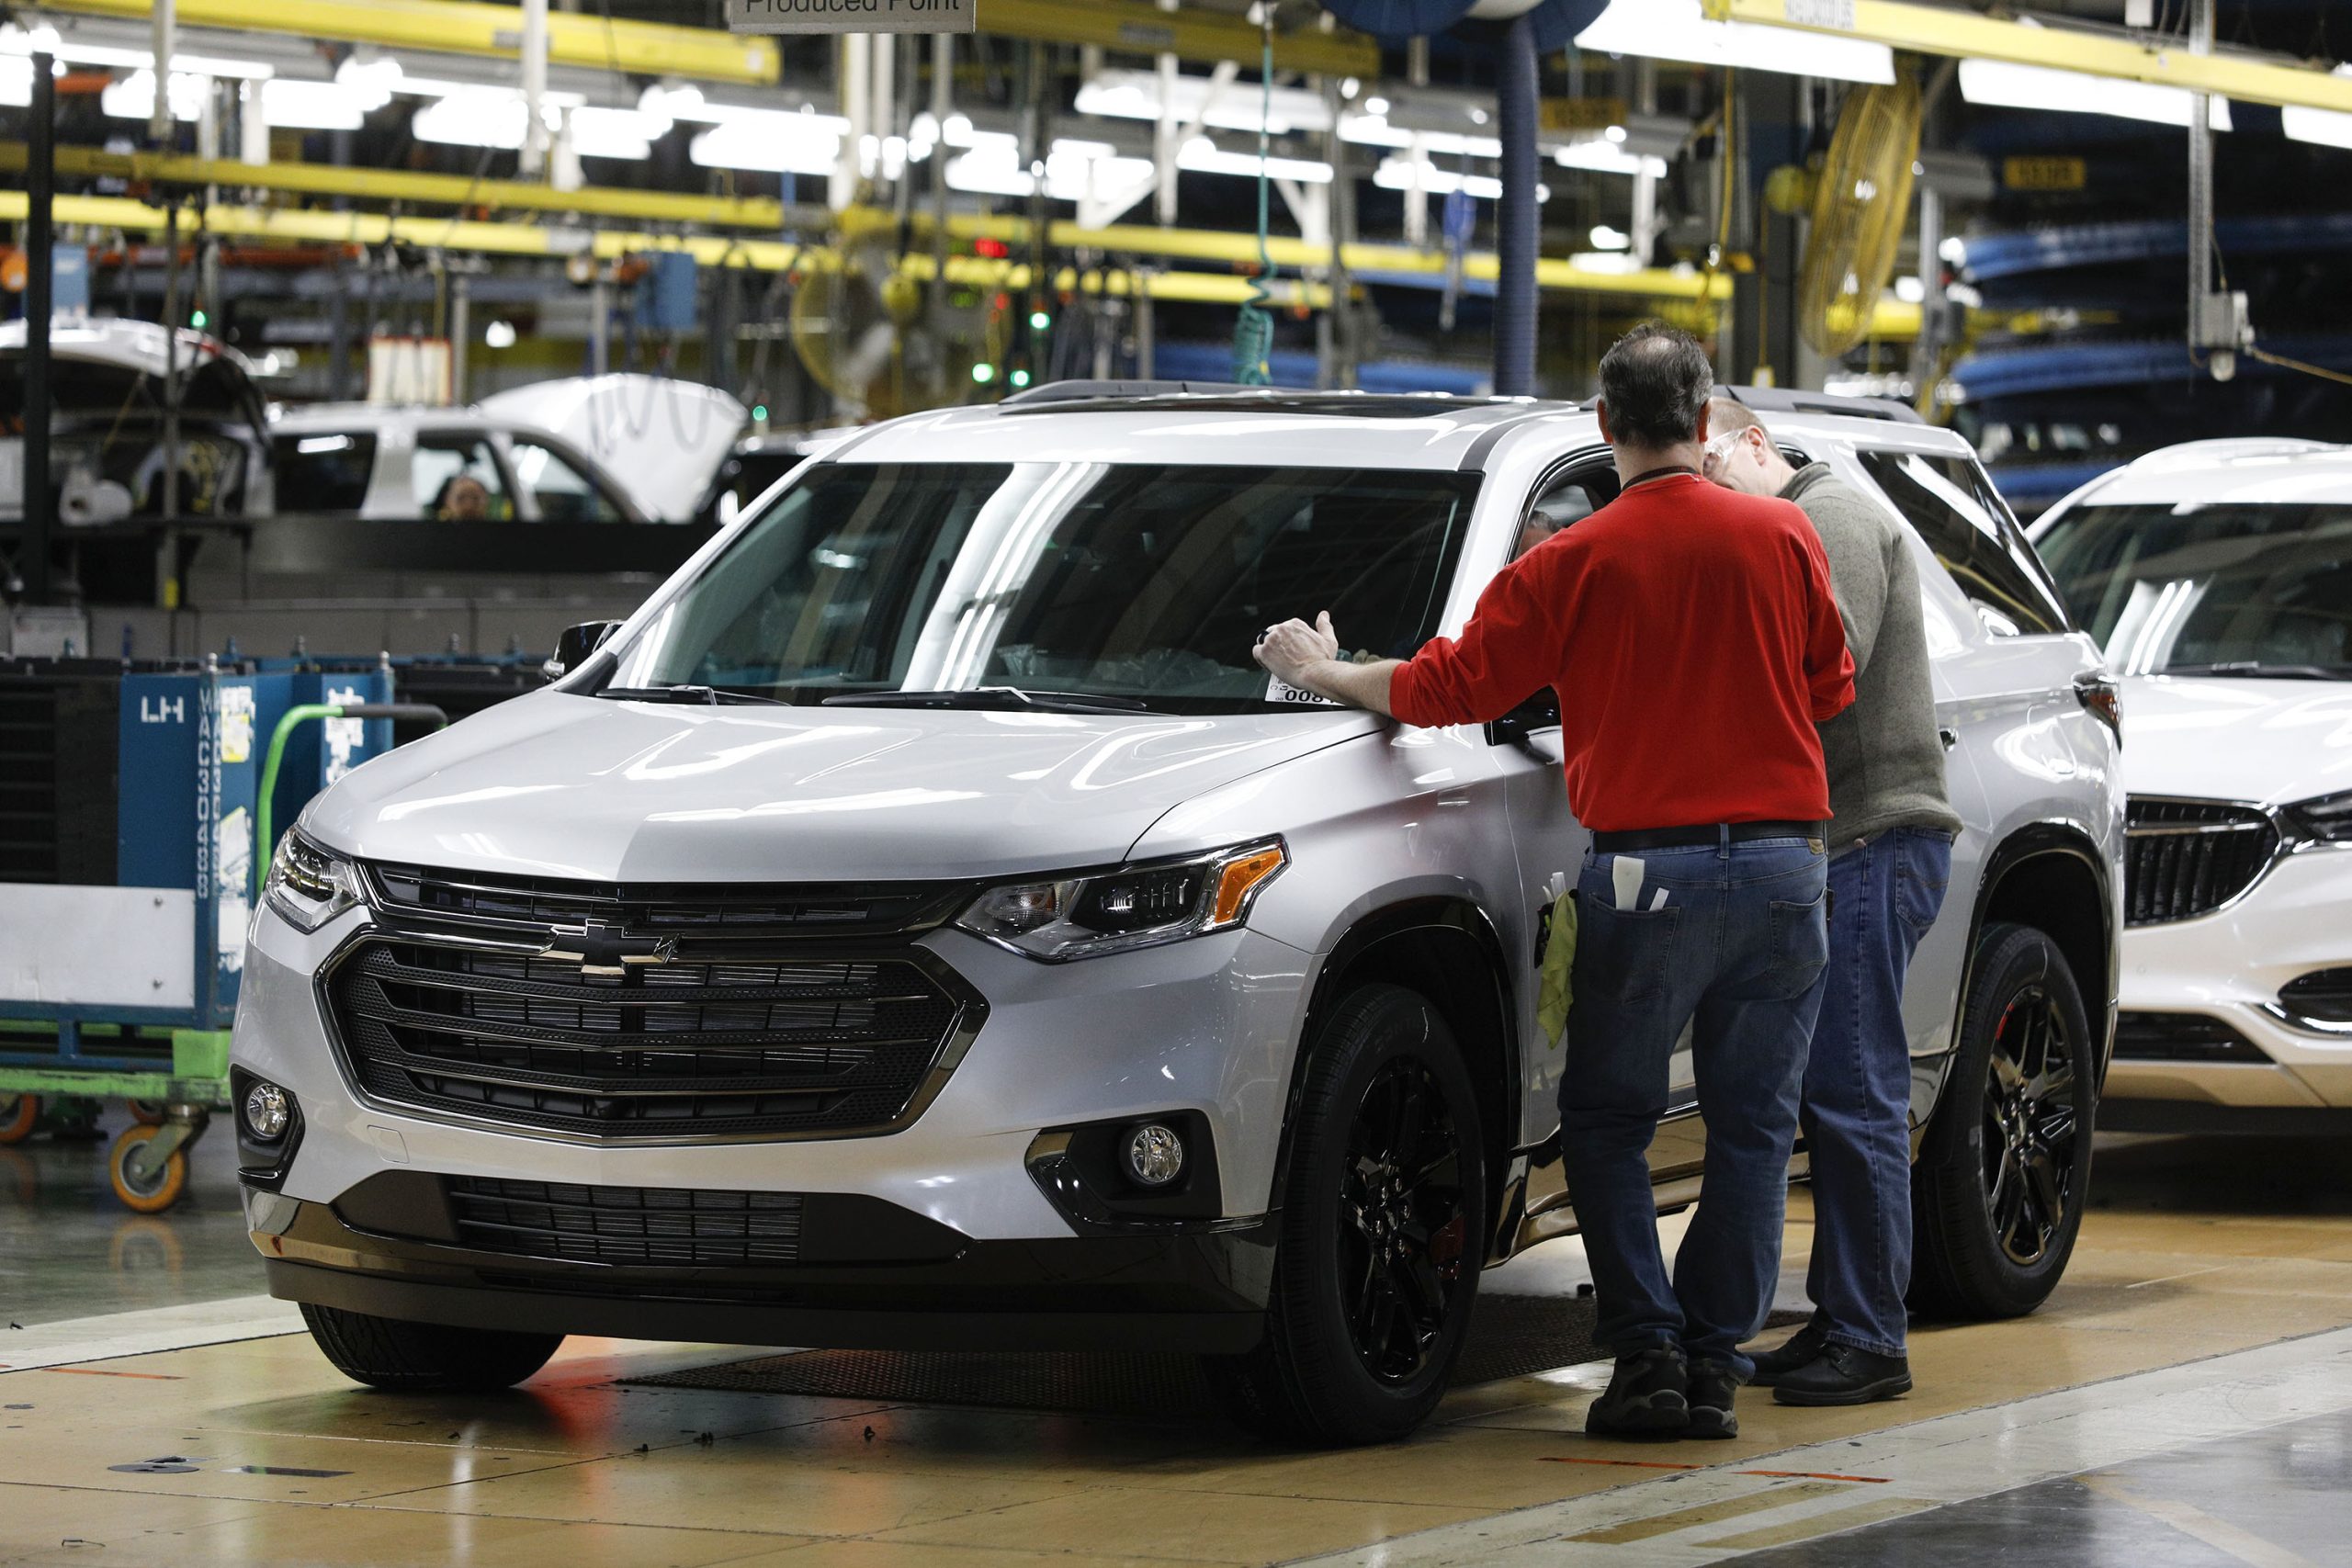 The three millionth vehicle produced at at the General Motors Lansing Delta Township Assembly Plant, a 2020 Chevrolet Traverse Redline Edition